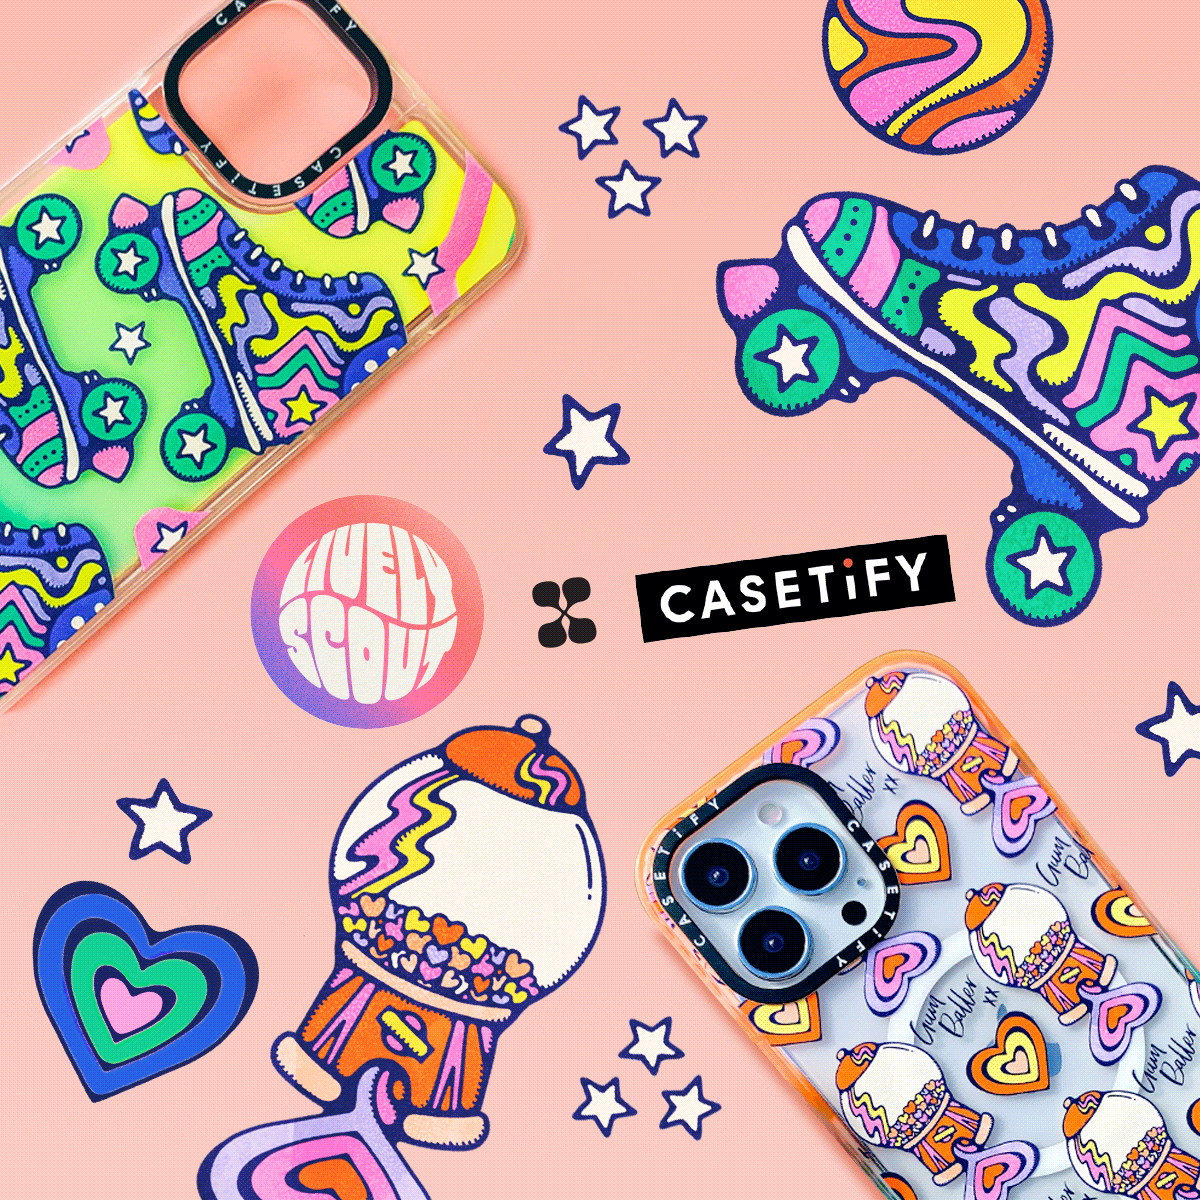 Lively Scout x Casetify phone case collaboration in retro roller skate and gumball designs.